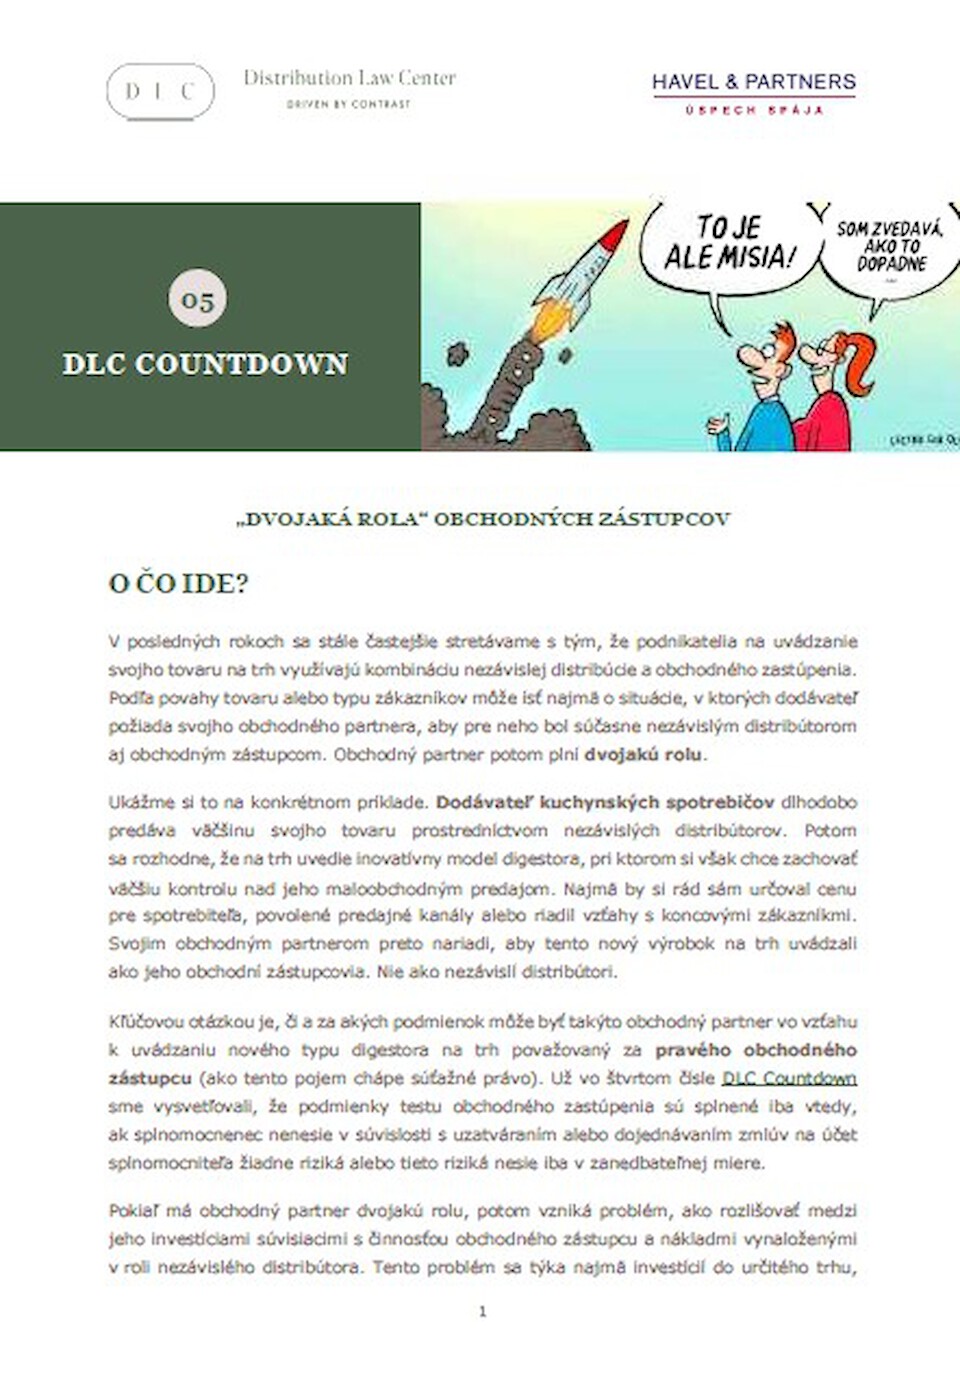 Distribution Law Center Countdown V- Agency (“Dual role” agents)